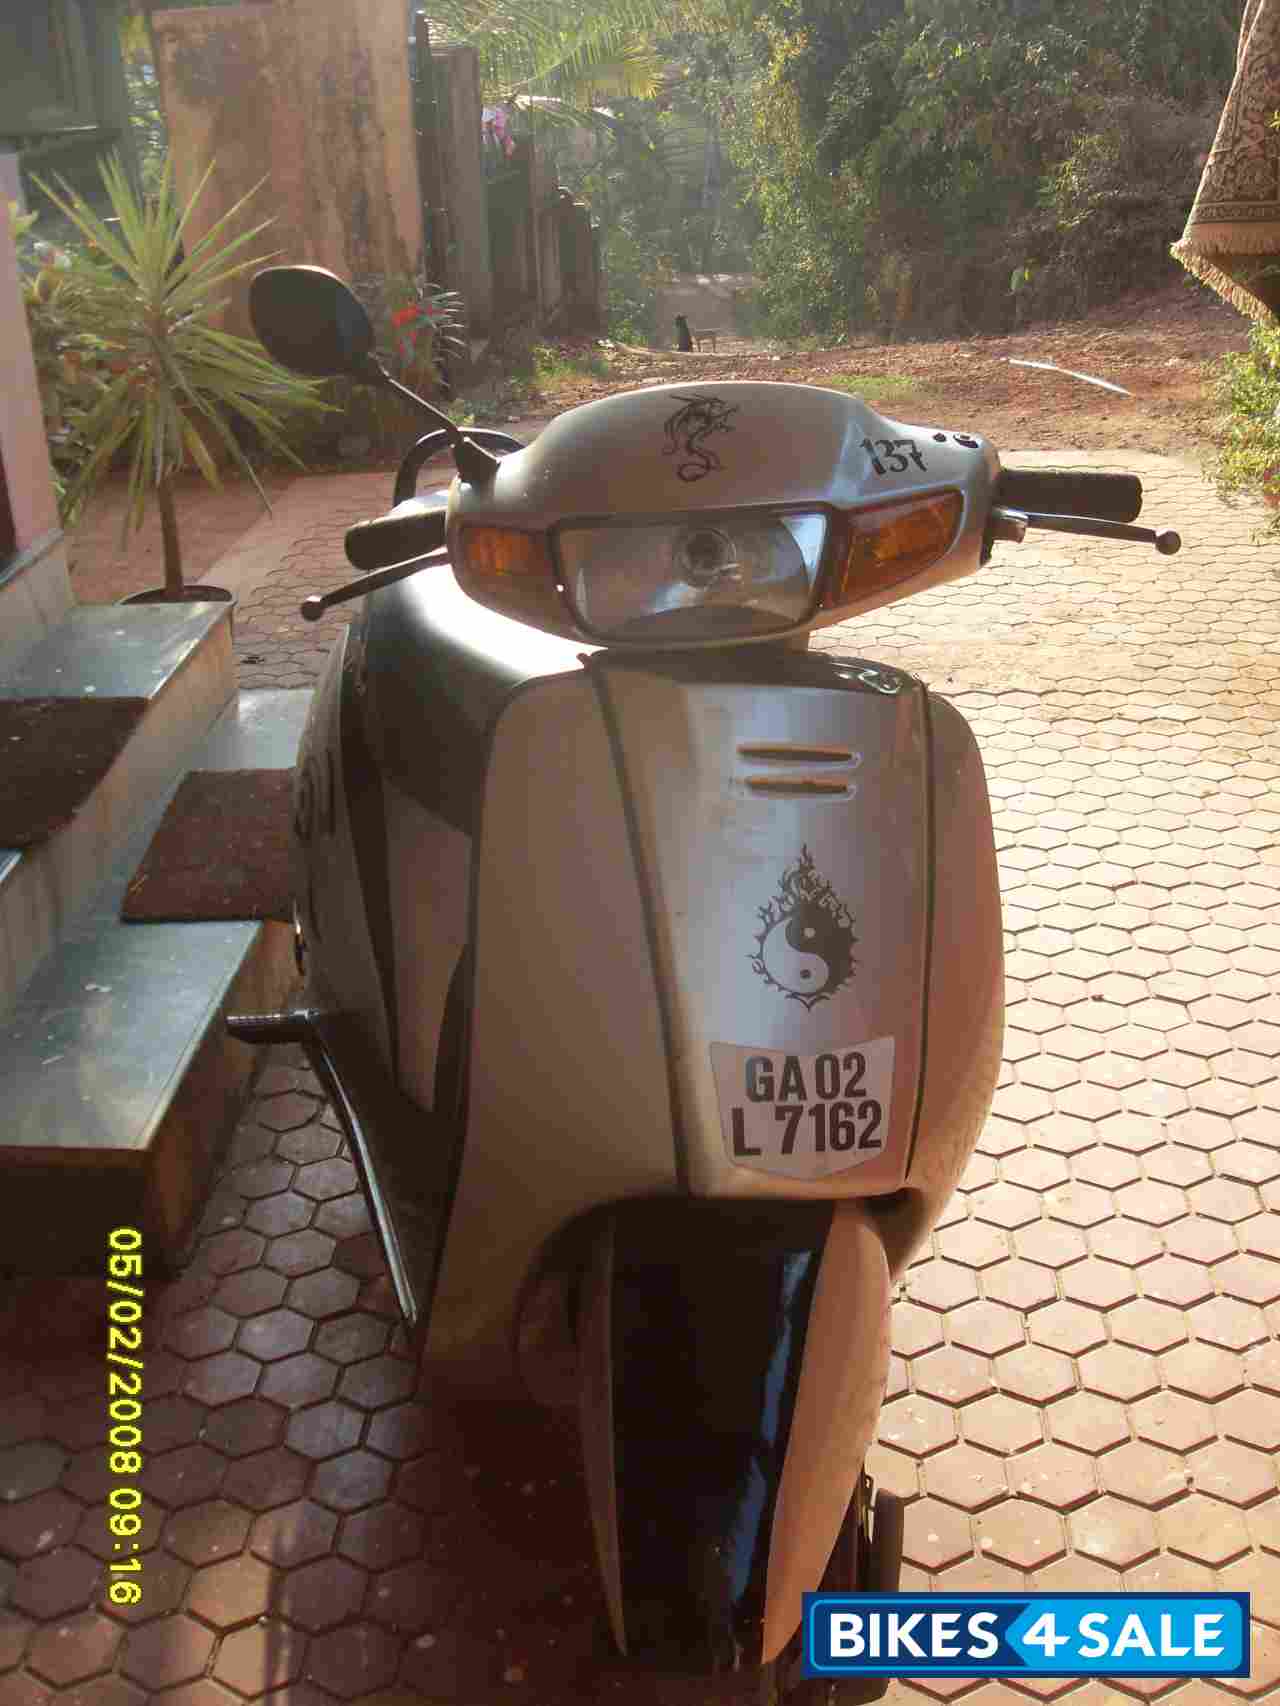 Used 2002 model Honda Activa for sale in South Goa. ID 44725 